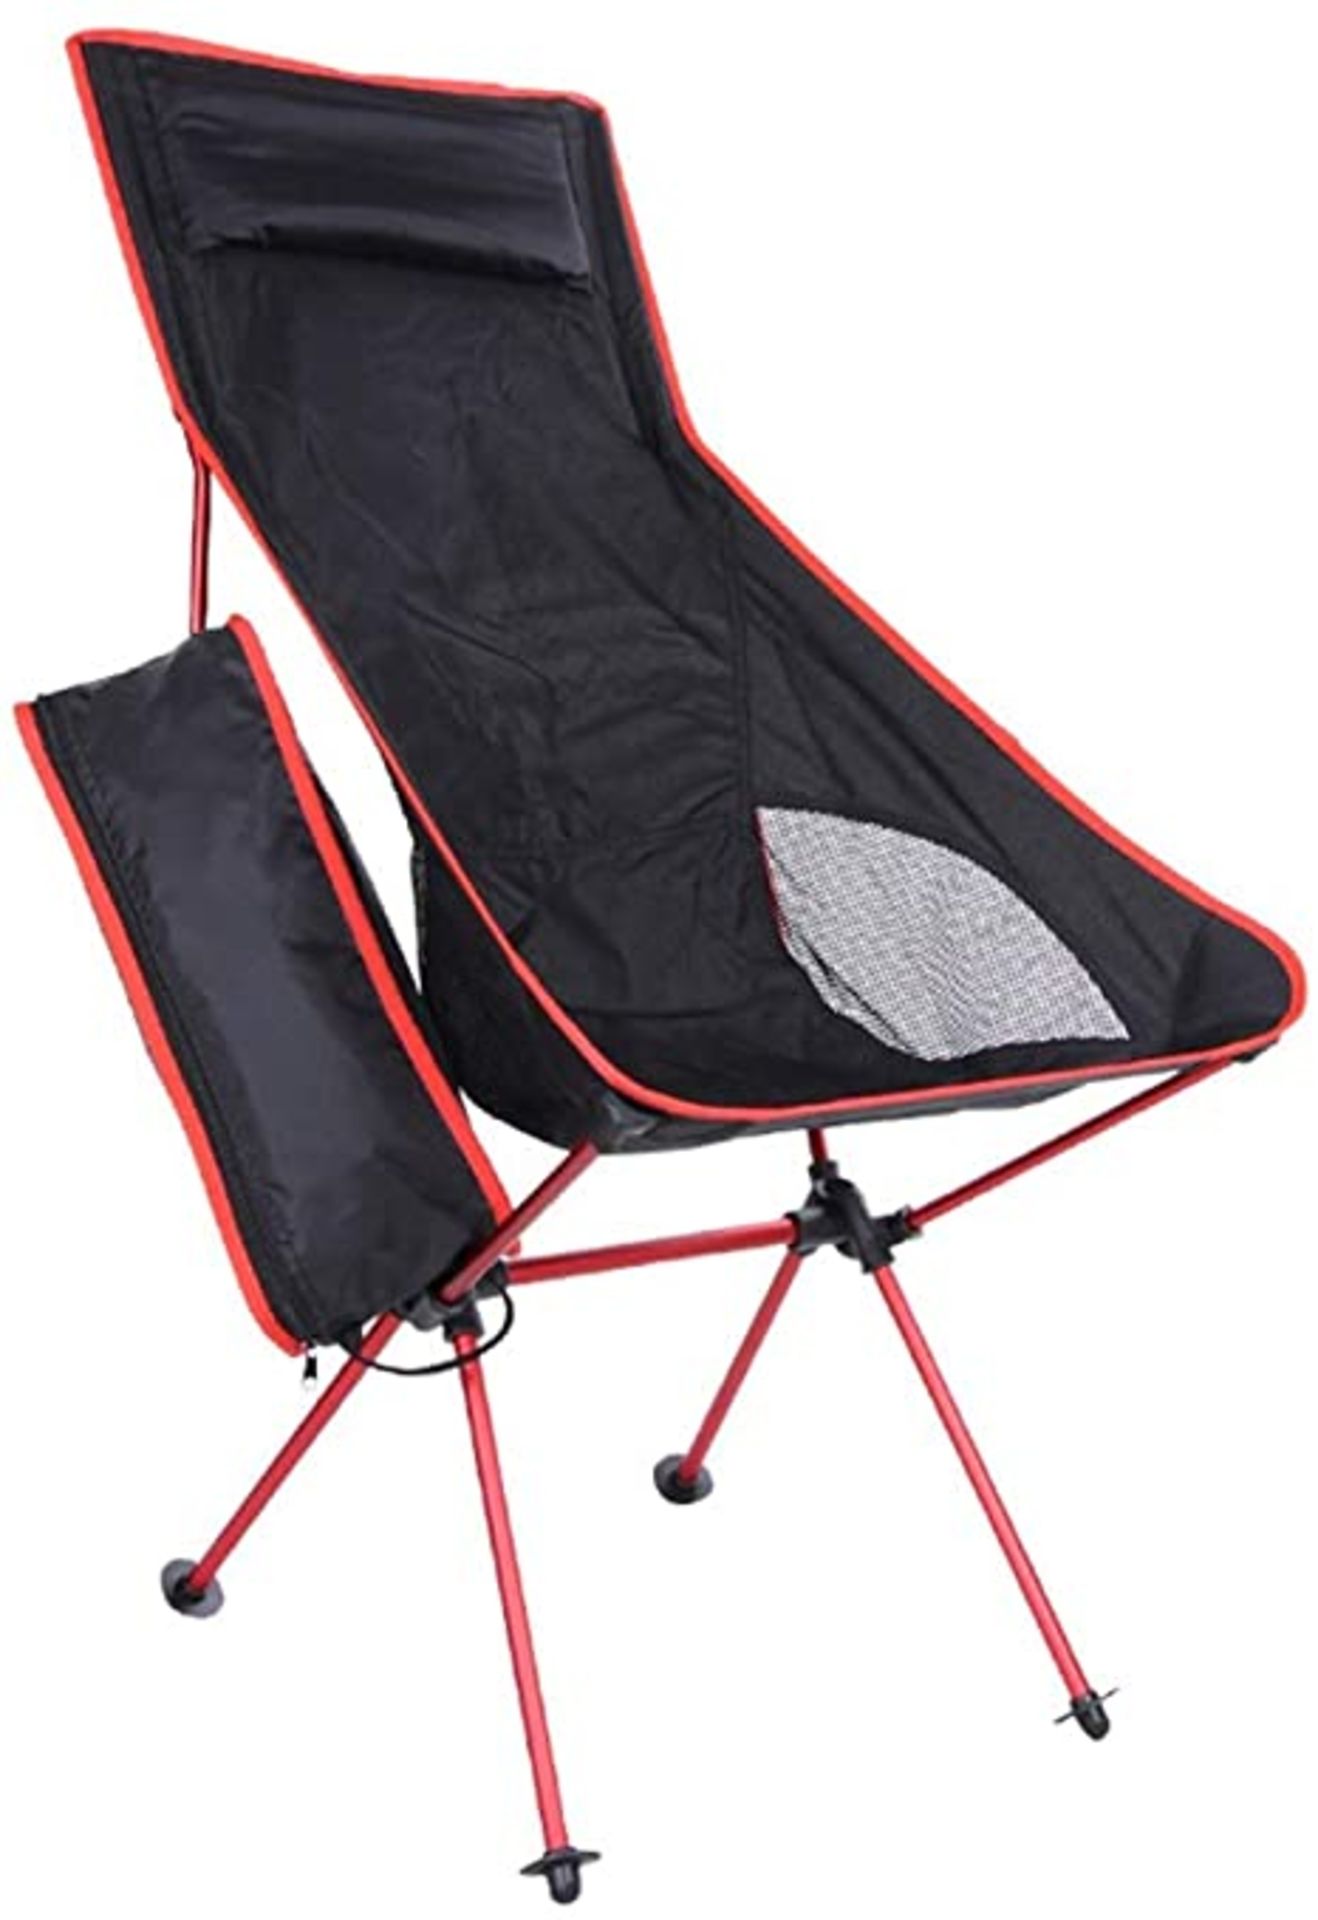 BAGGED TAOPE FOLD AWAY CHAIR RRP £37.49Condition ReportAppraisal Available on Request- All Items are